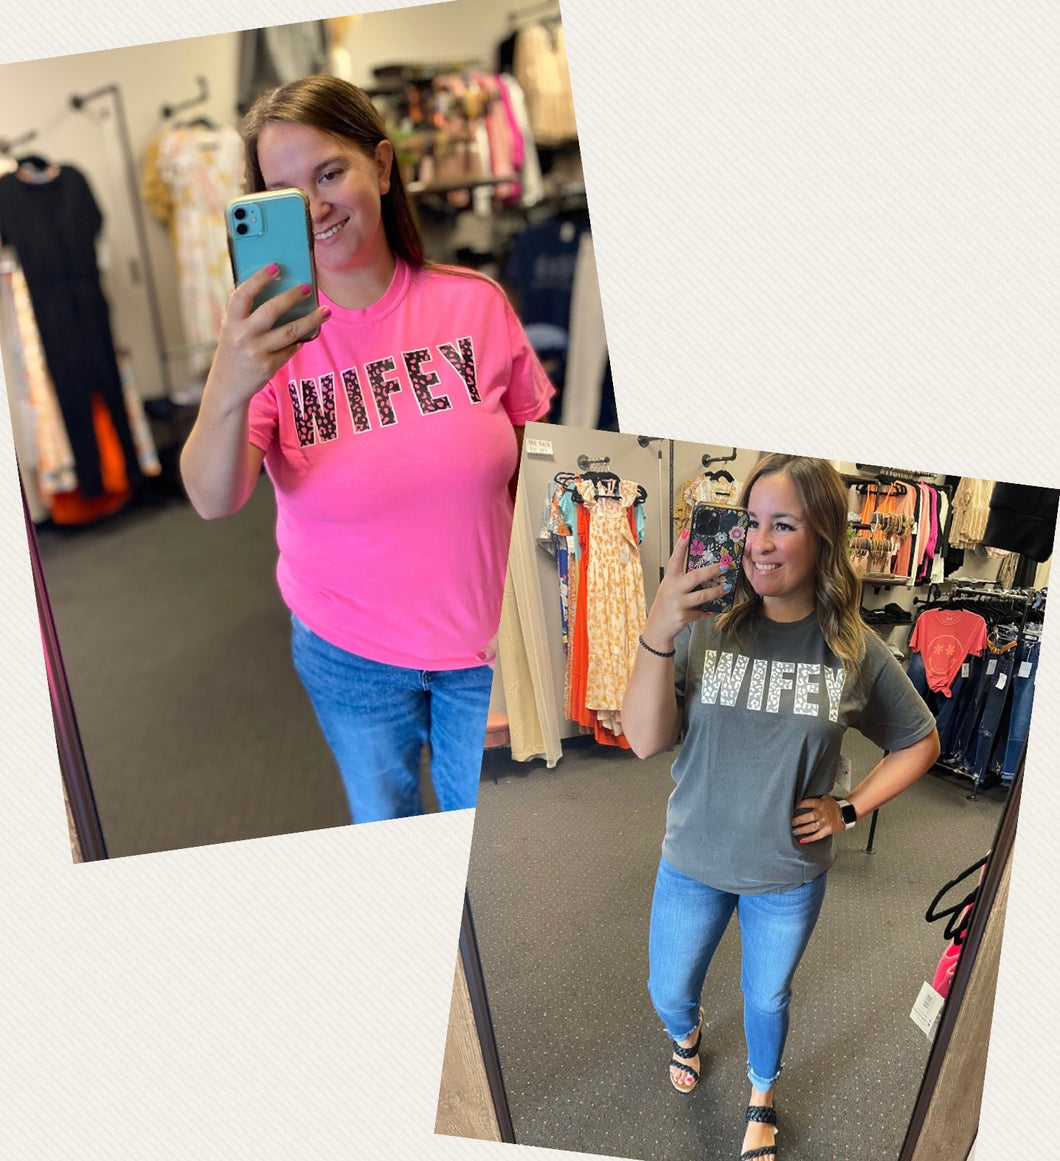 WIFEY GRAPHIC TEE